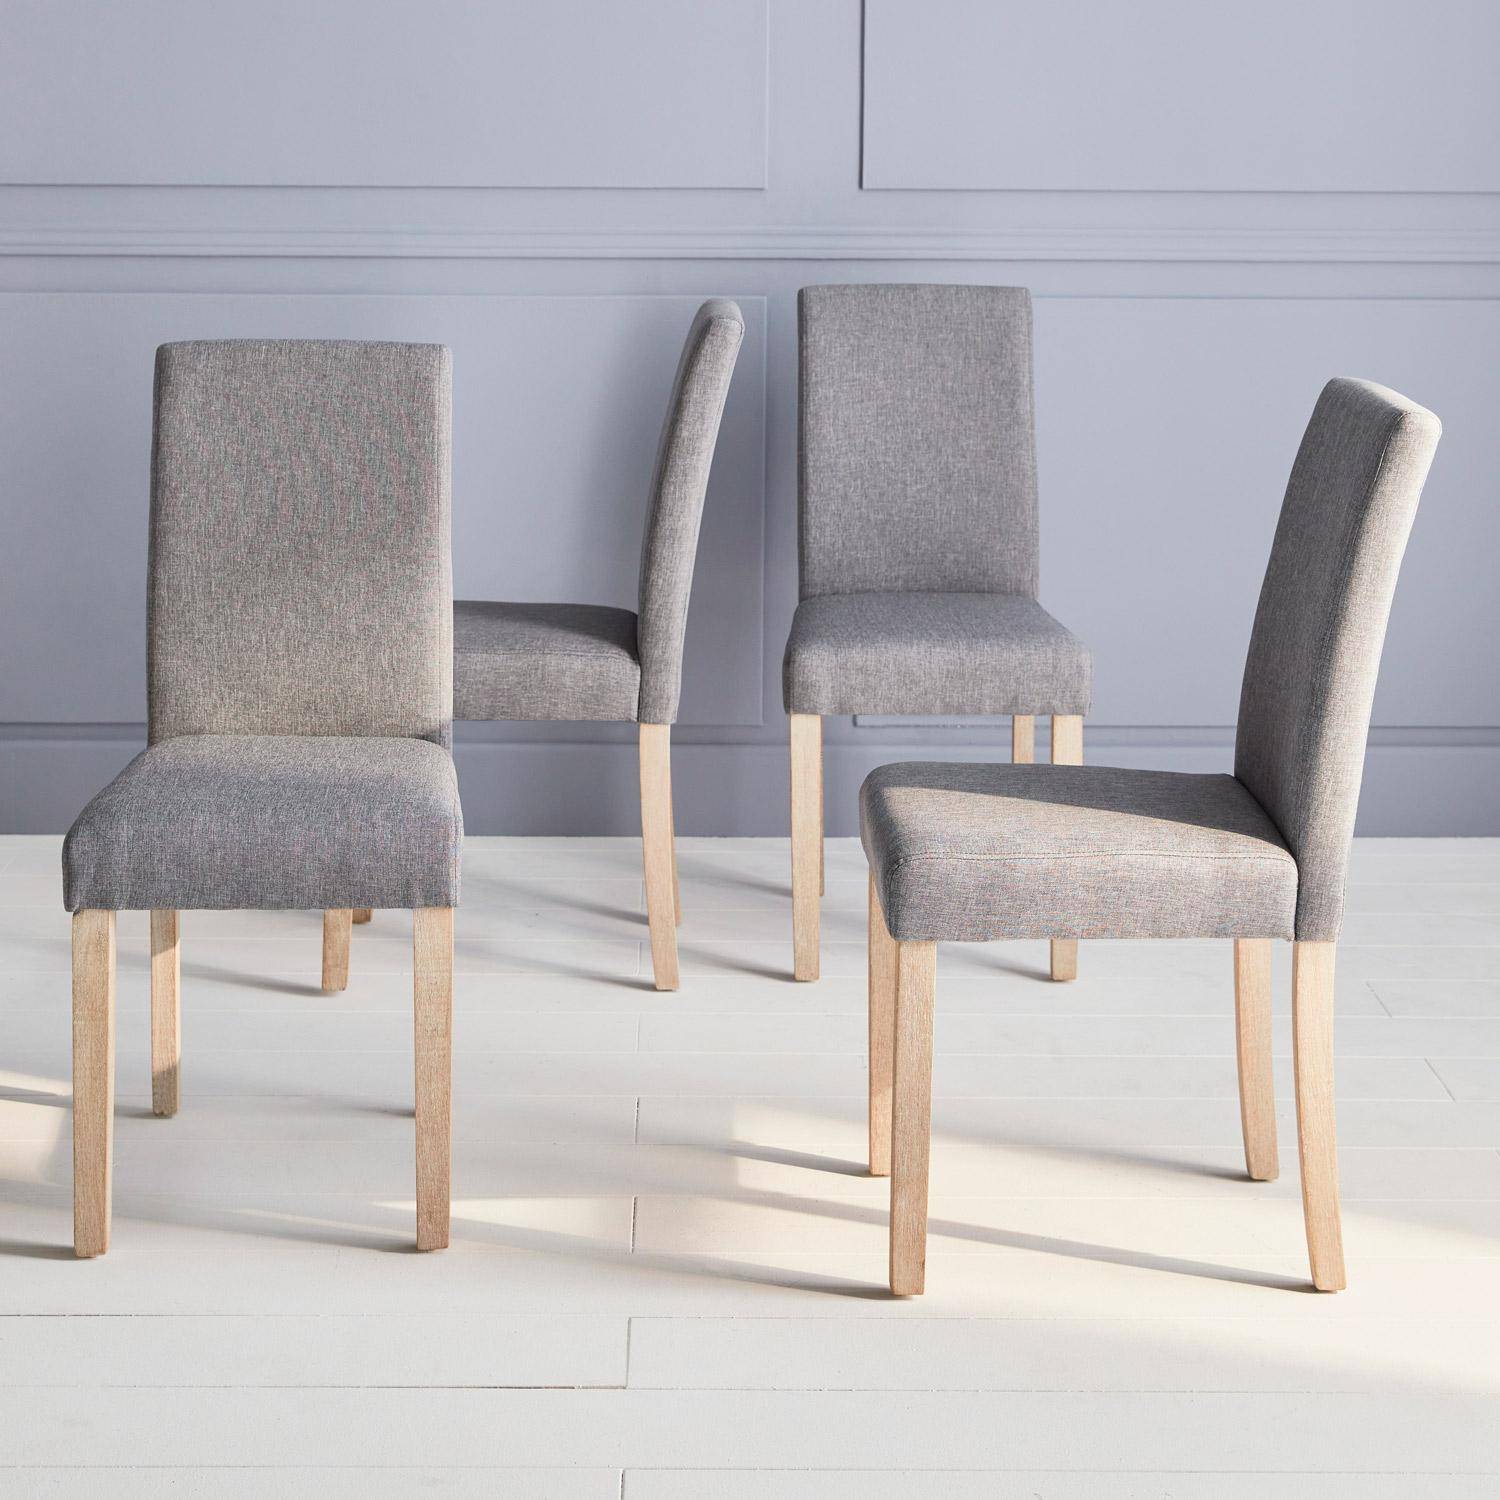 Set of 4 fabric dining chairs with wooden legs - Rita - Light grey Photo2